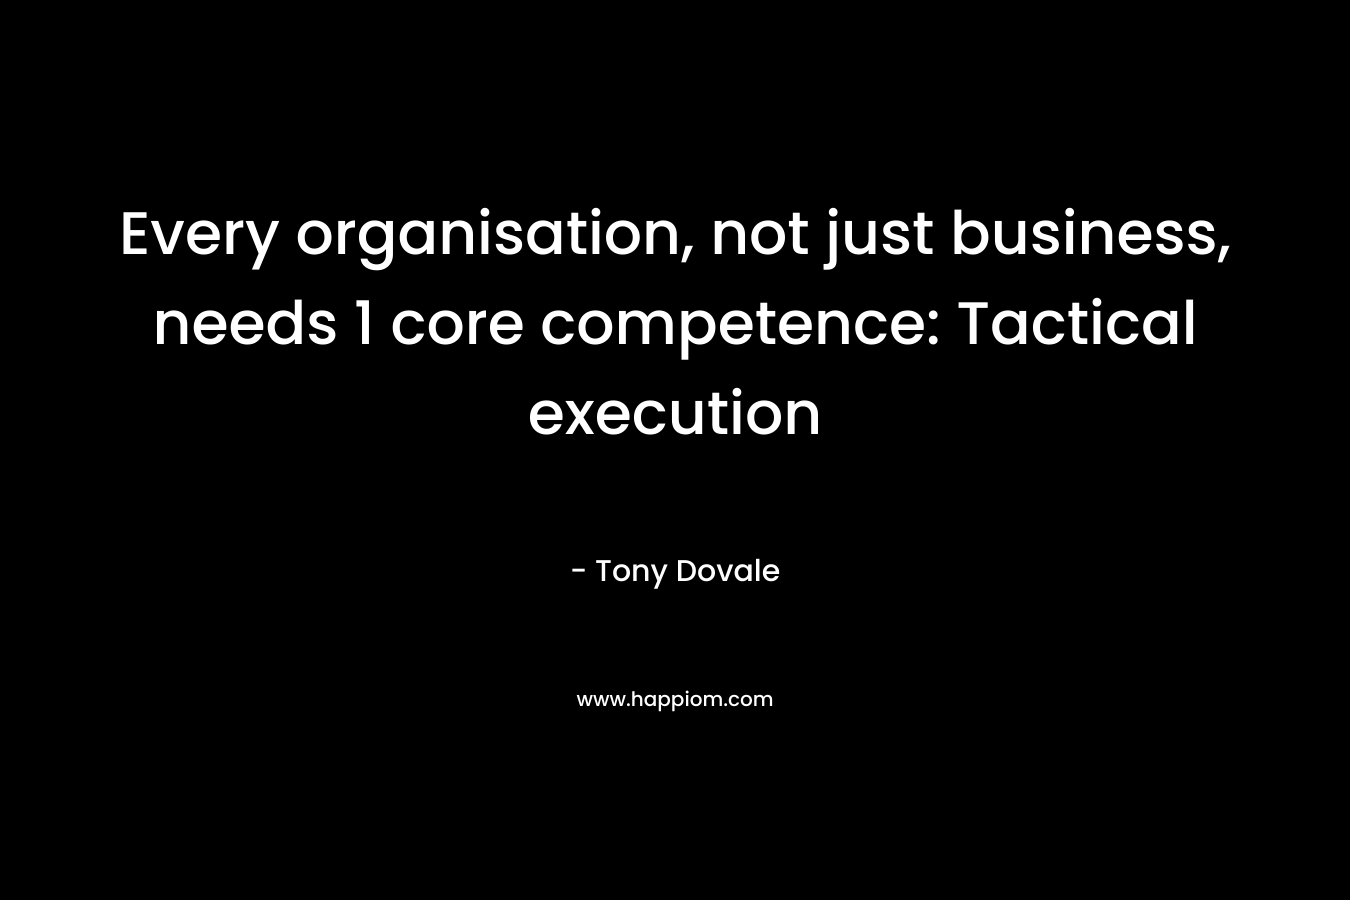 Every organisation, not just business, needs 1 core competence: Tactical execution – Tony Dovale